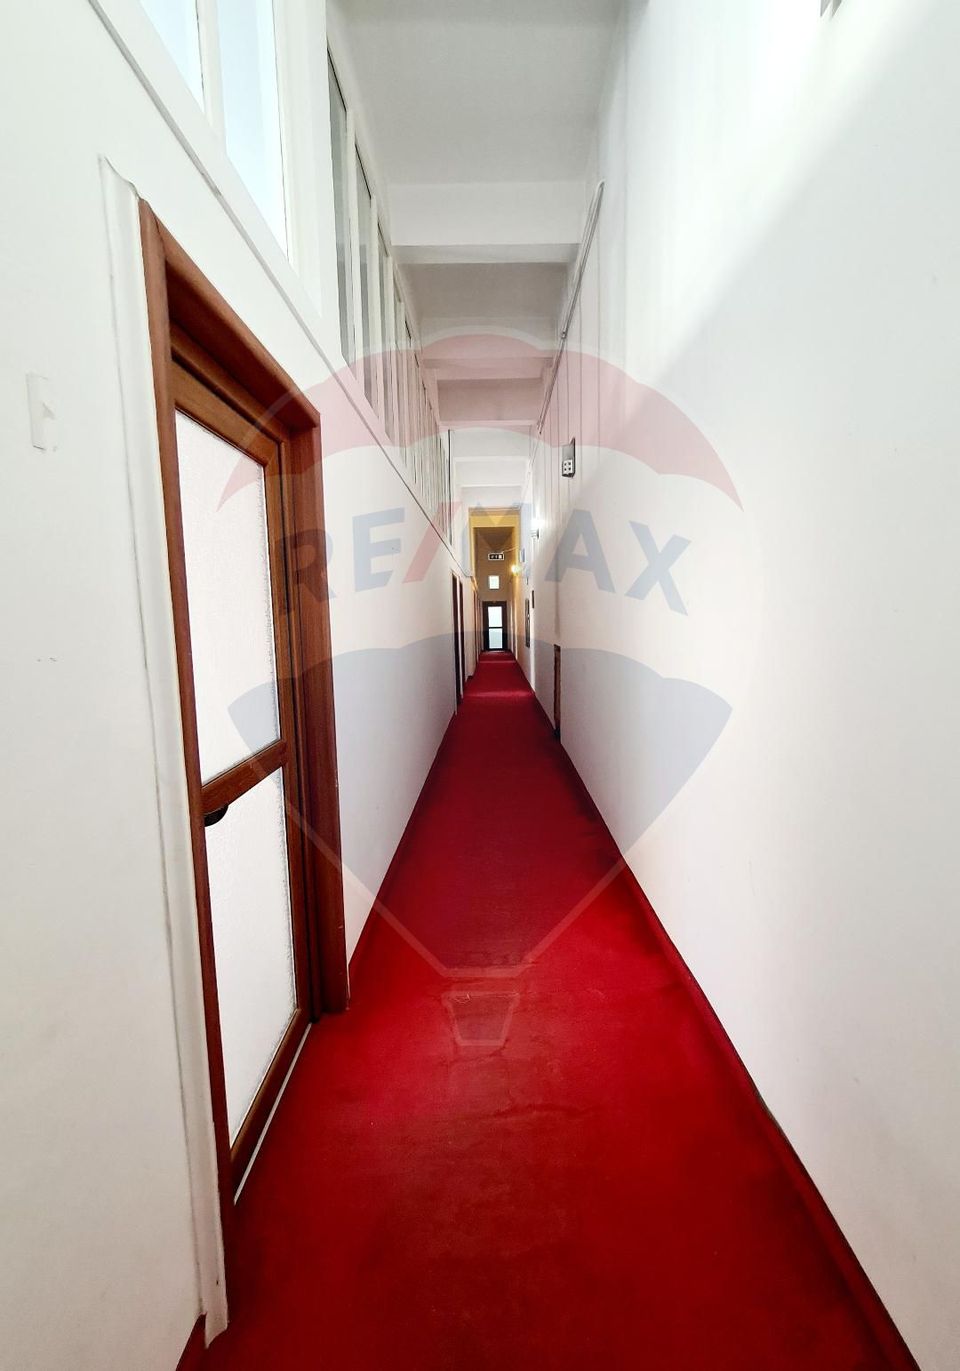 15sq.m Office Space for rent, Universitate area